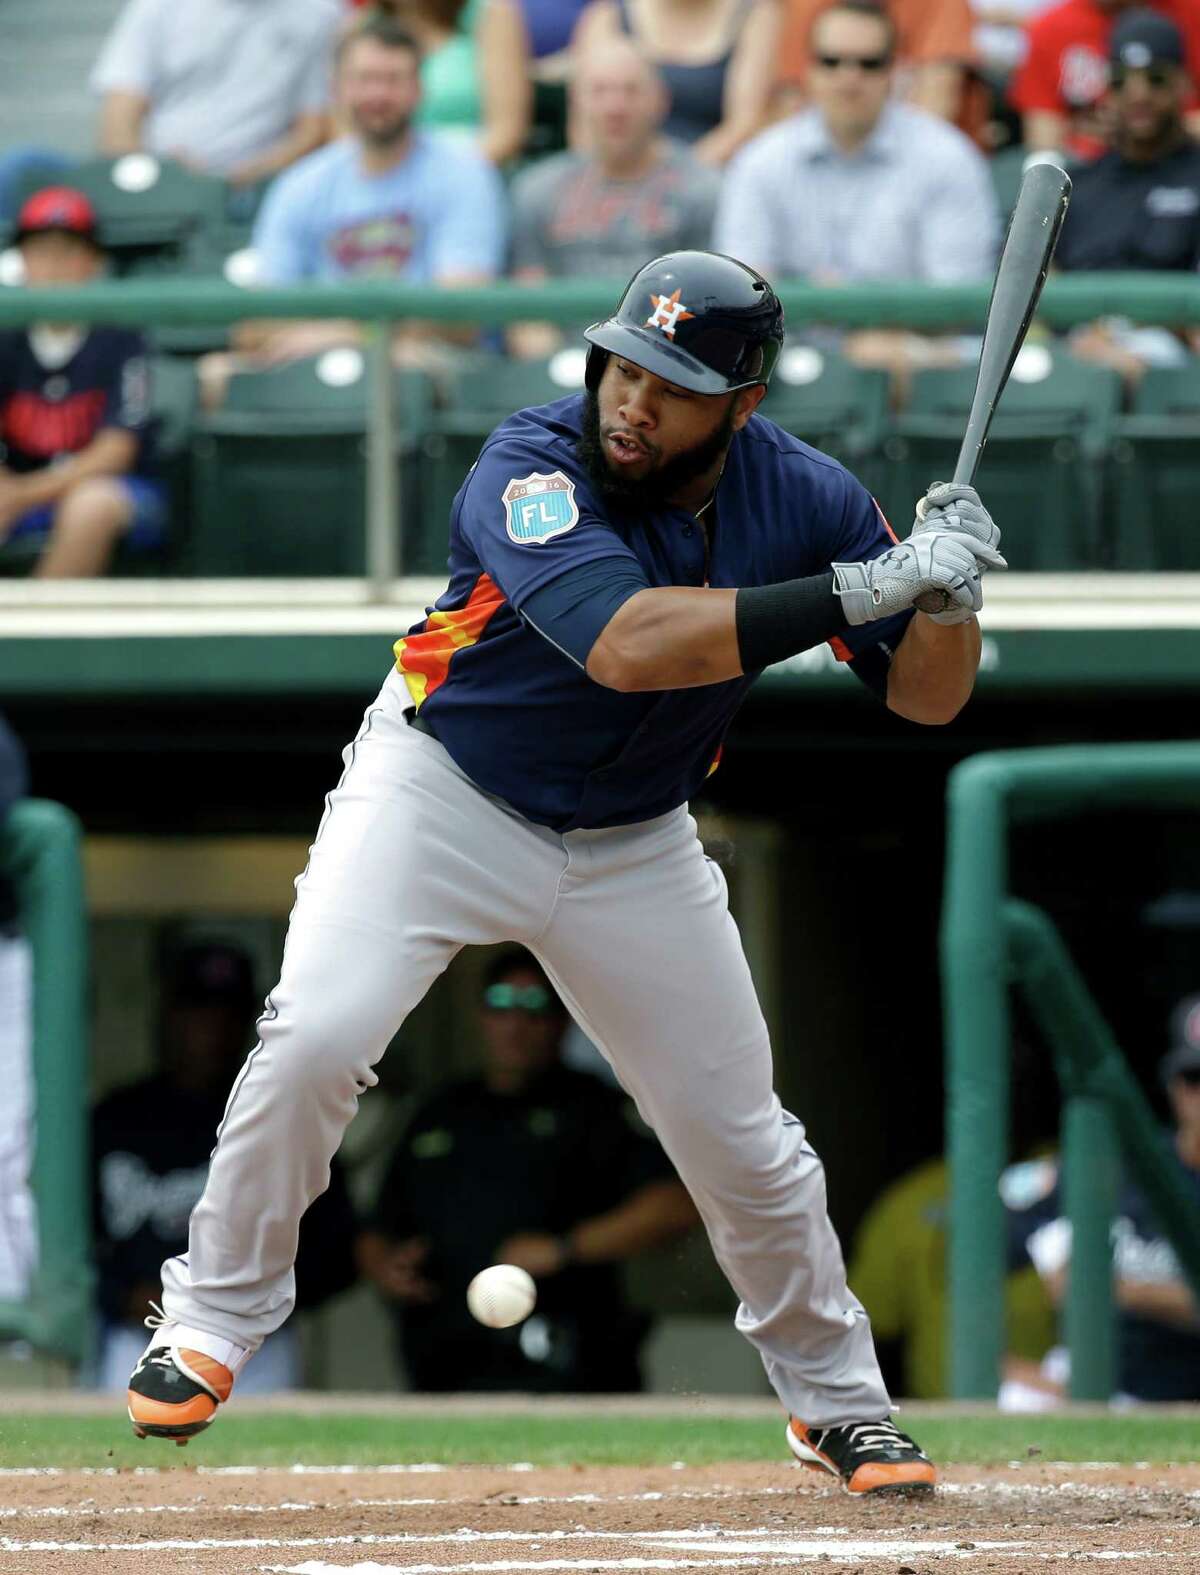 Houston Astros' Jon Singleton jumps back to avoid being hit by an inside pitch in the second inning of a spring training baseball game against the Atlanta Braves, Friday, March 25, 2016, in Kissimmee, Fla.